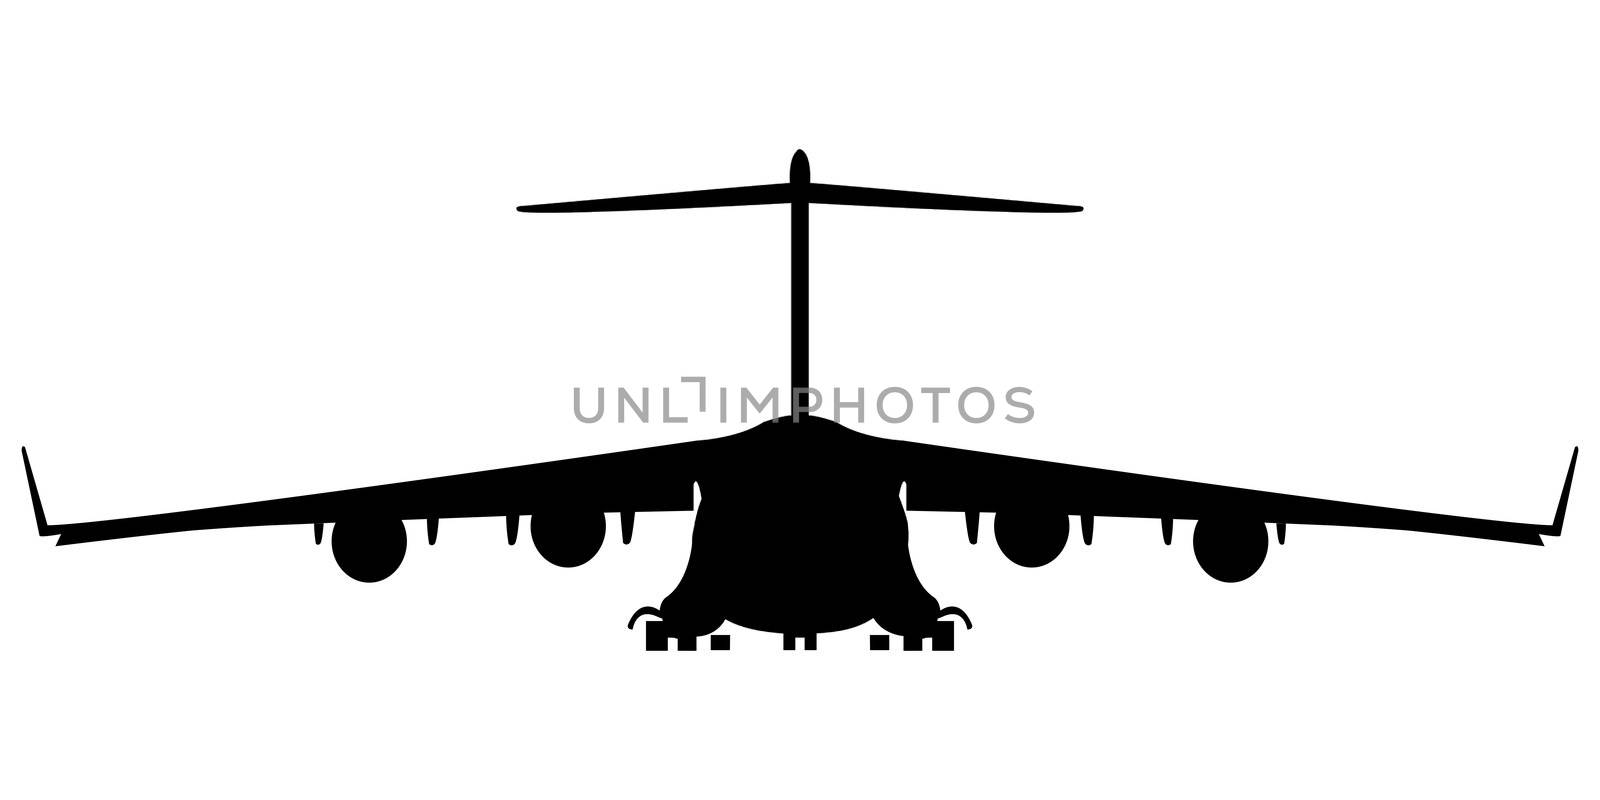 military air plane silhouette, vector art illustration; more silhouettes and drawings in my gallery